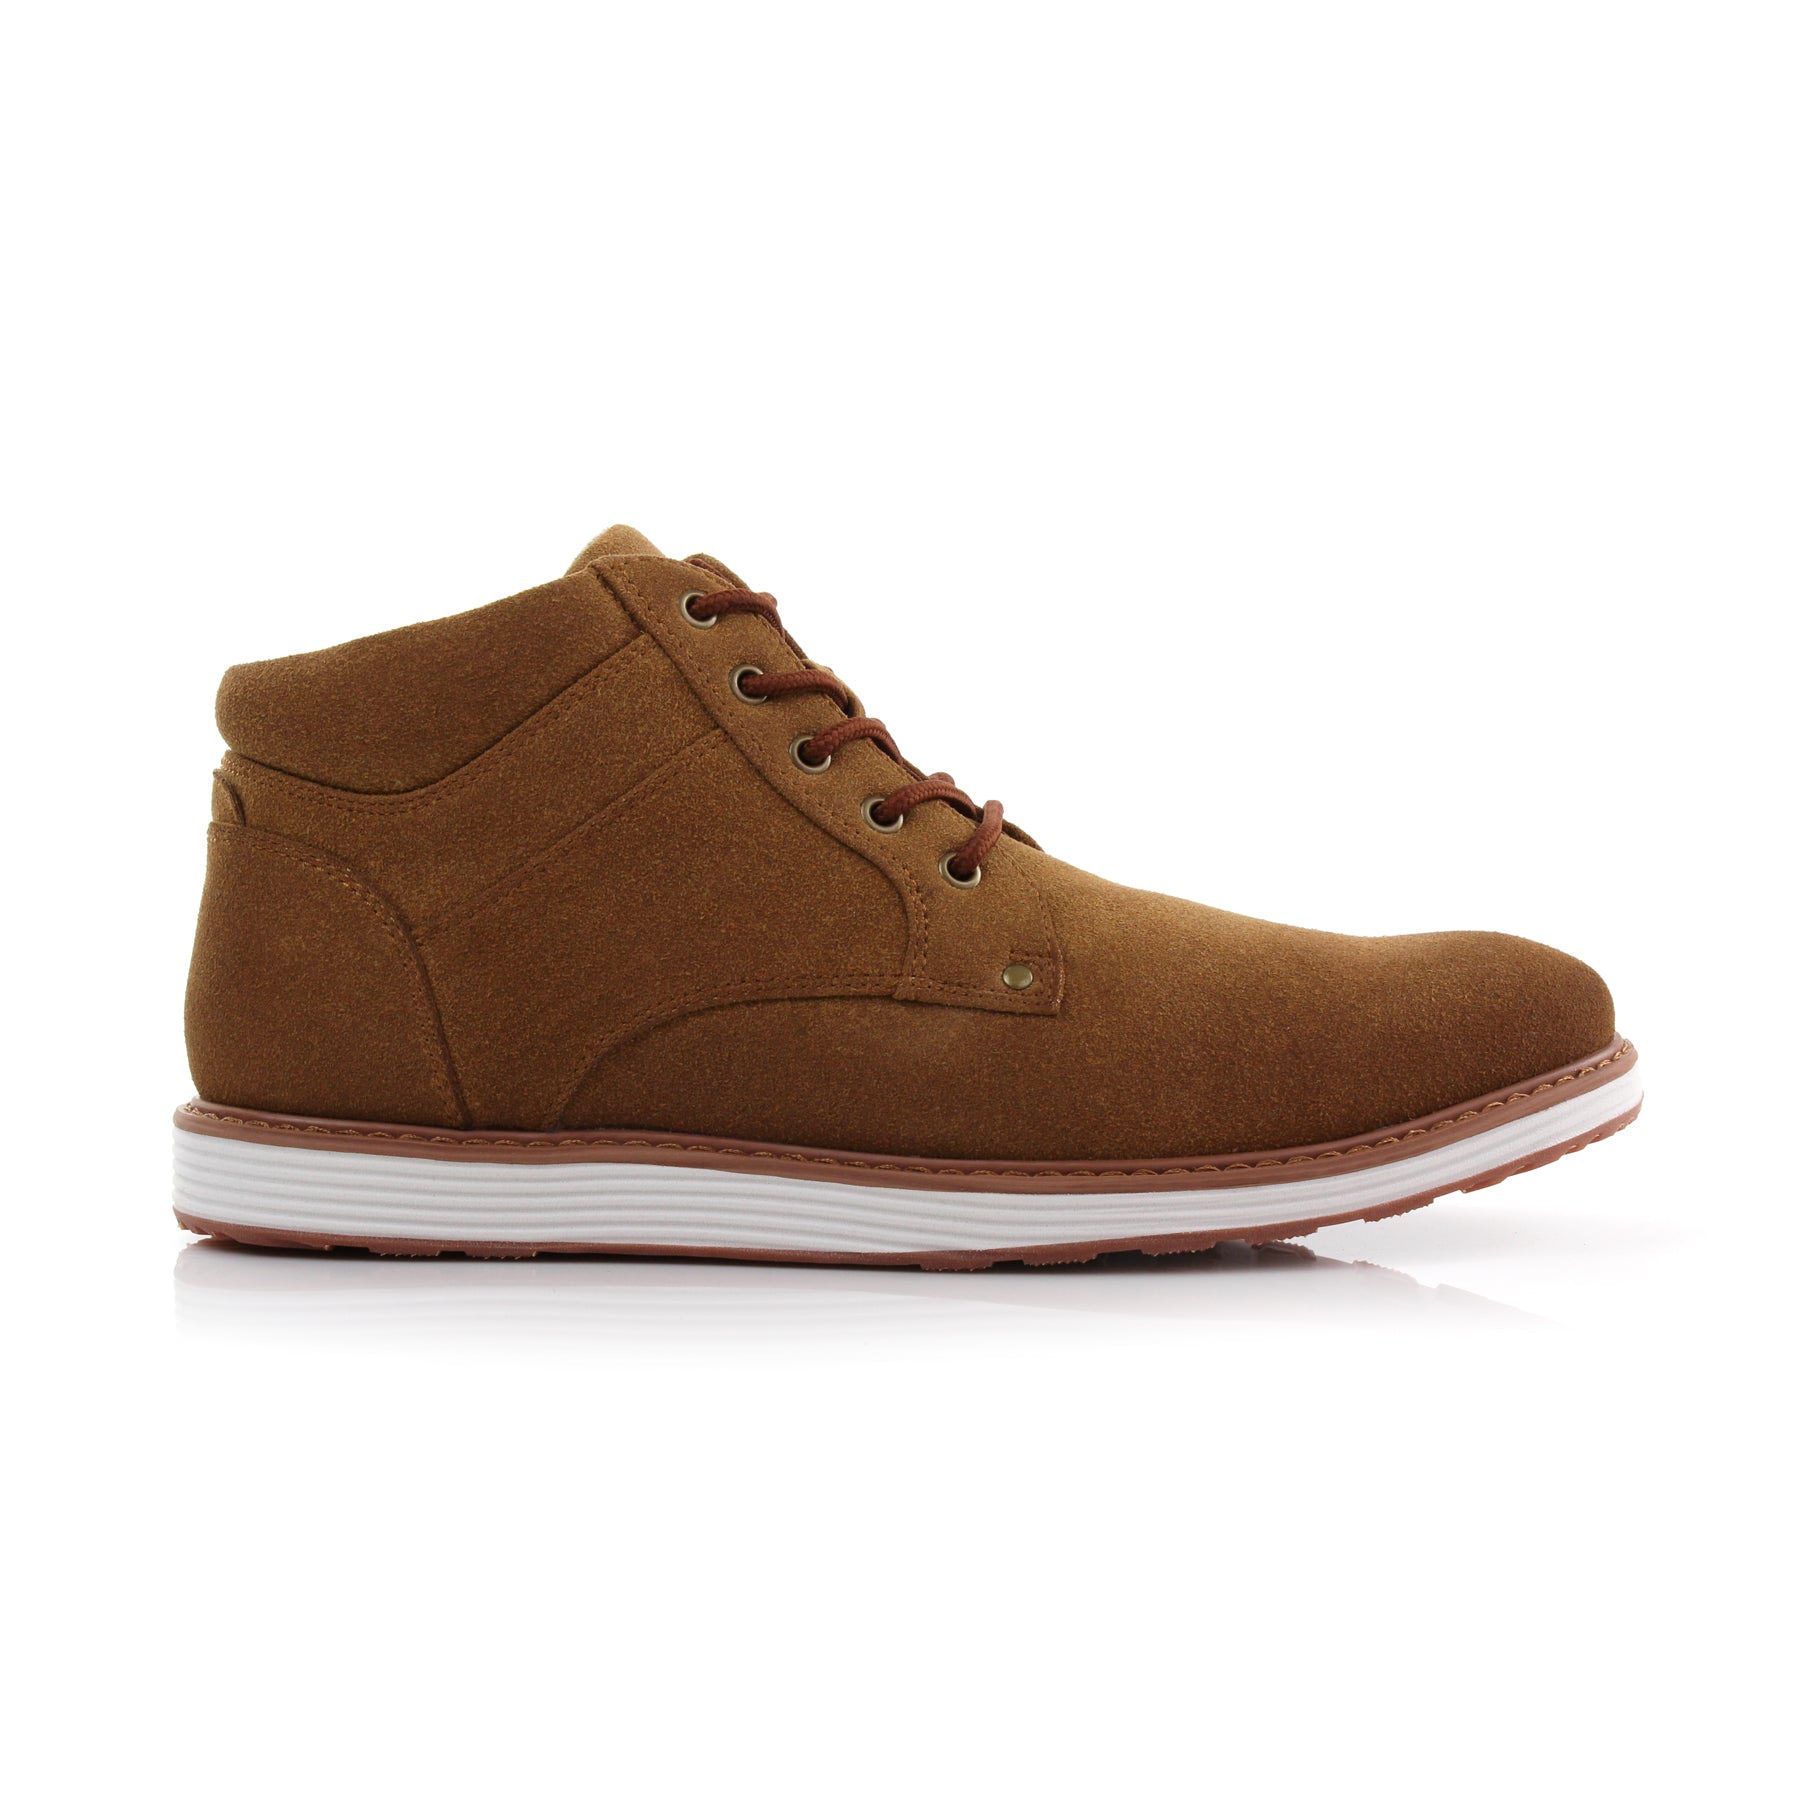 Suede Sneakers | Jax by Ferro Aldo | Conal Footwear | Outer Side Angle View